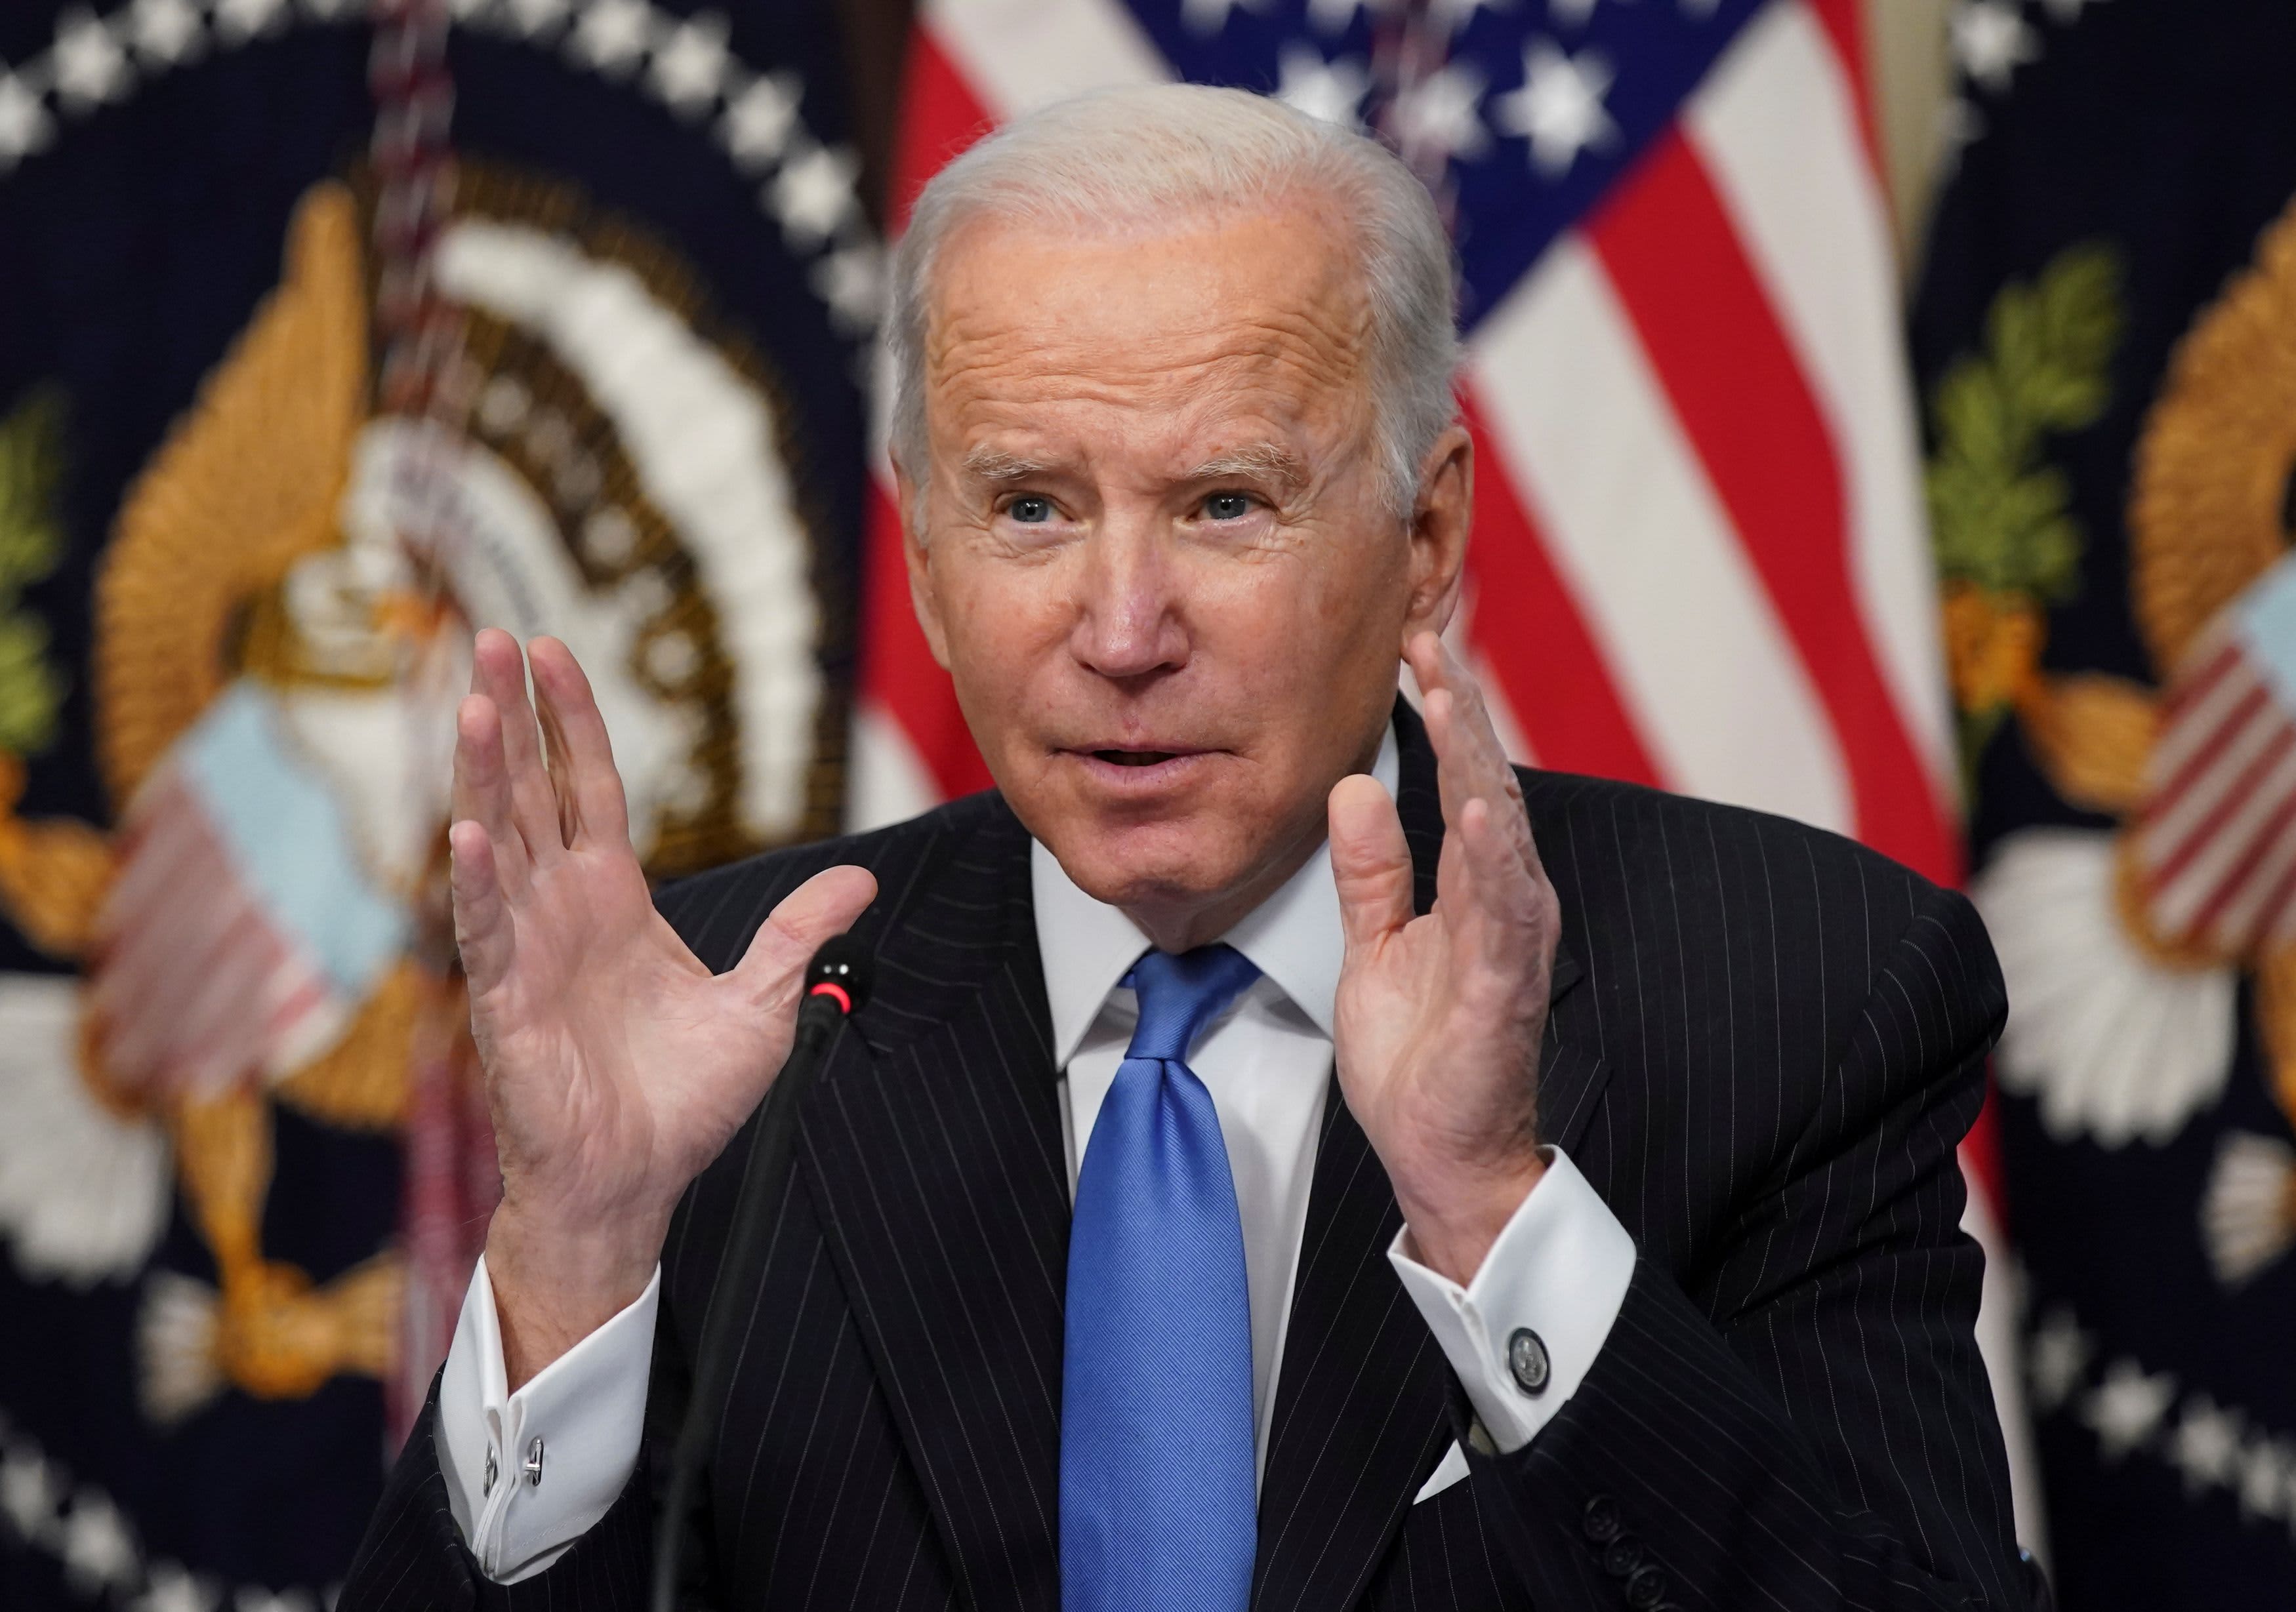 The latest sign of President Biden’s inflation politics problem comes from Main Street